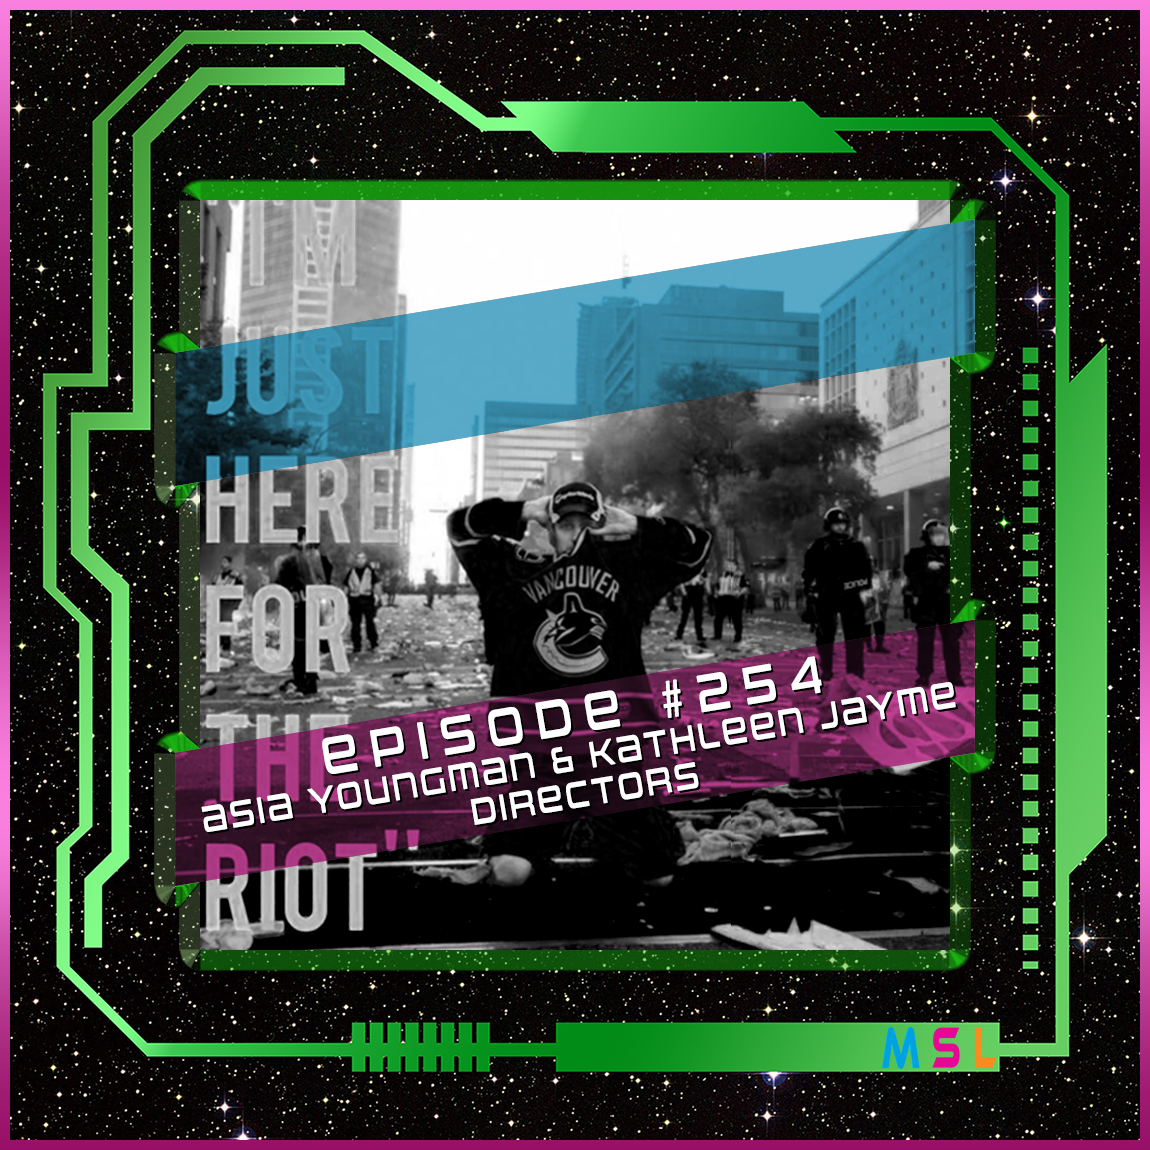 254 | Asia Youngman & Kathleen Jayme (30 for 30: I’m Just Here for the Riot)